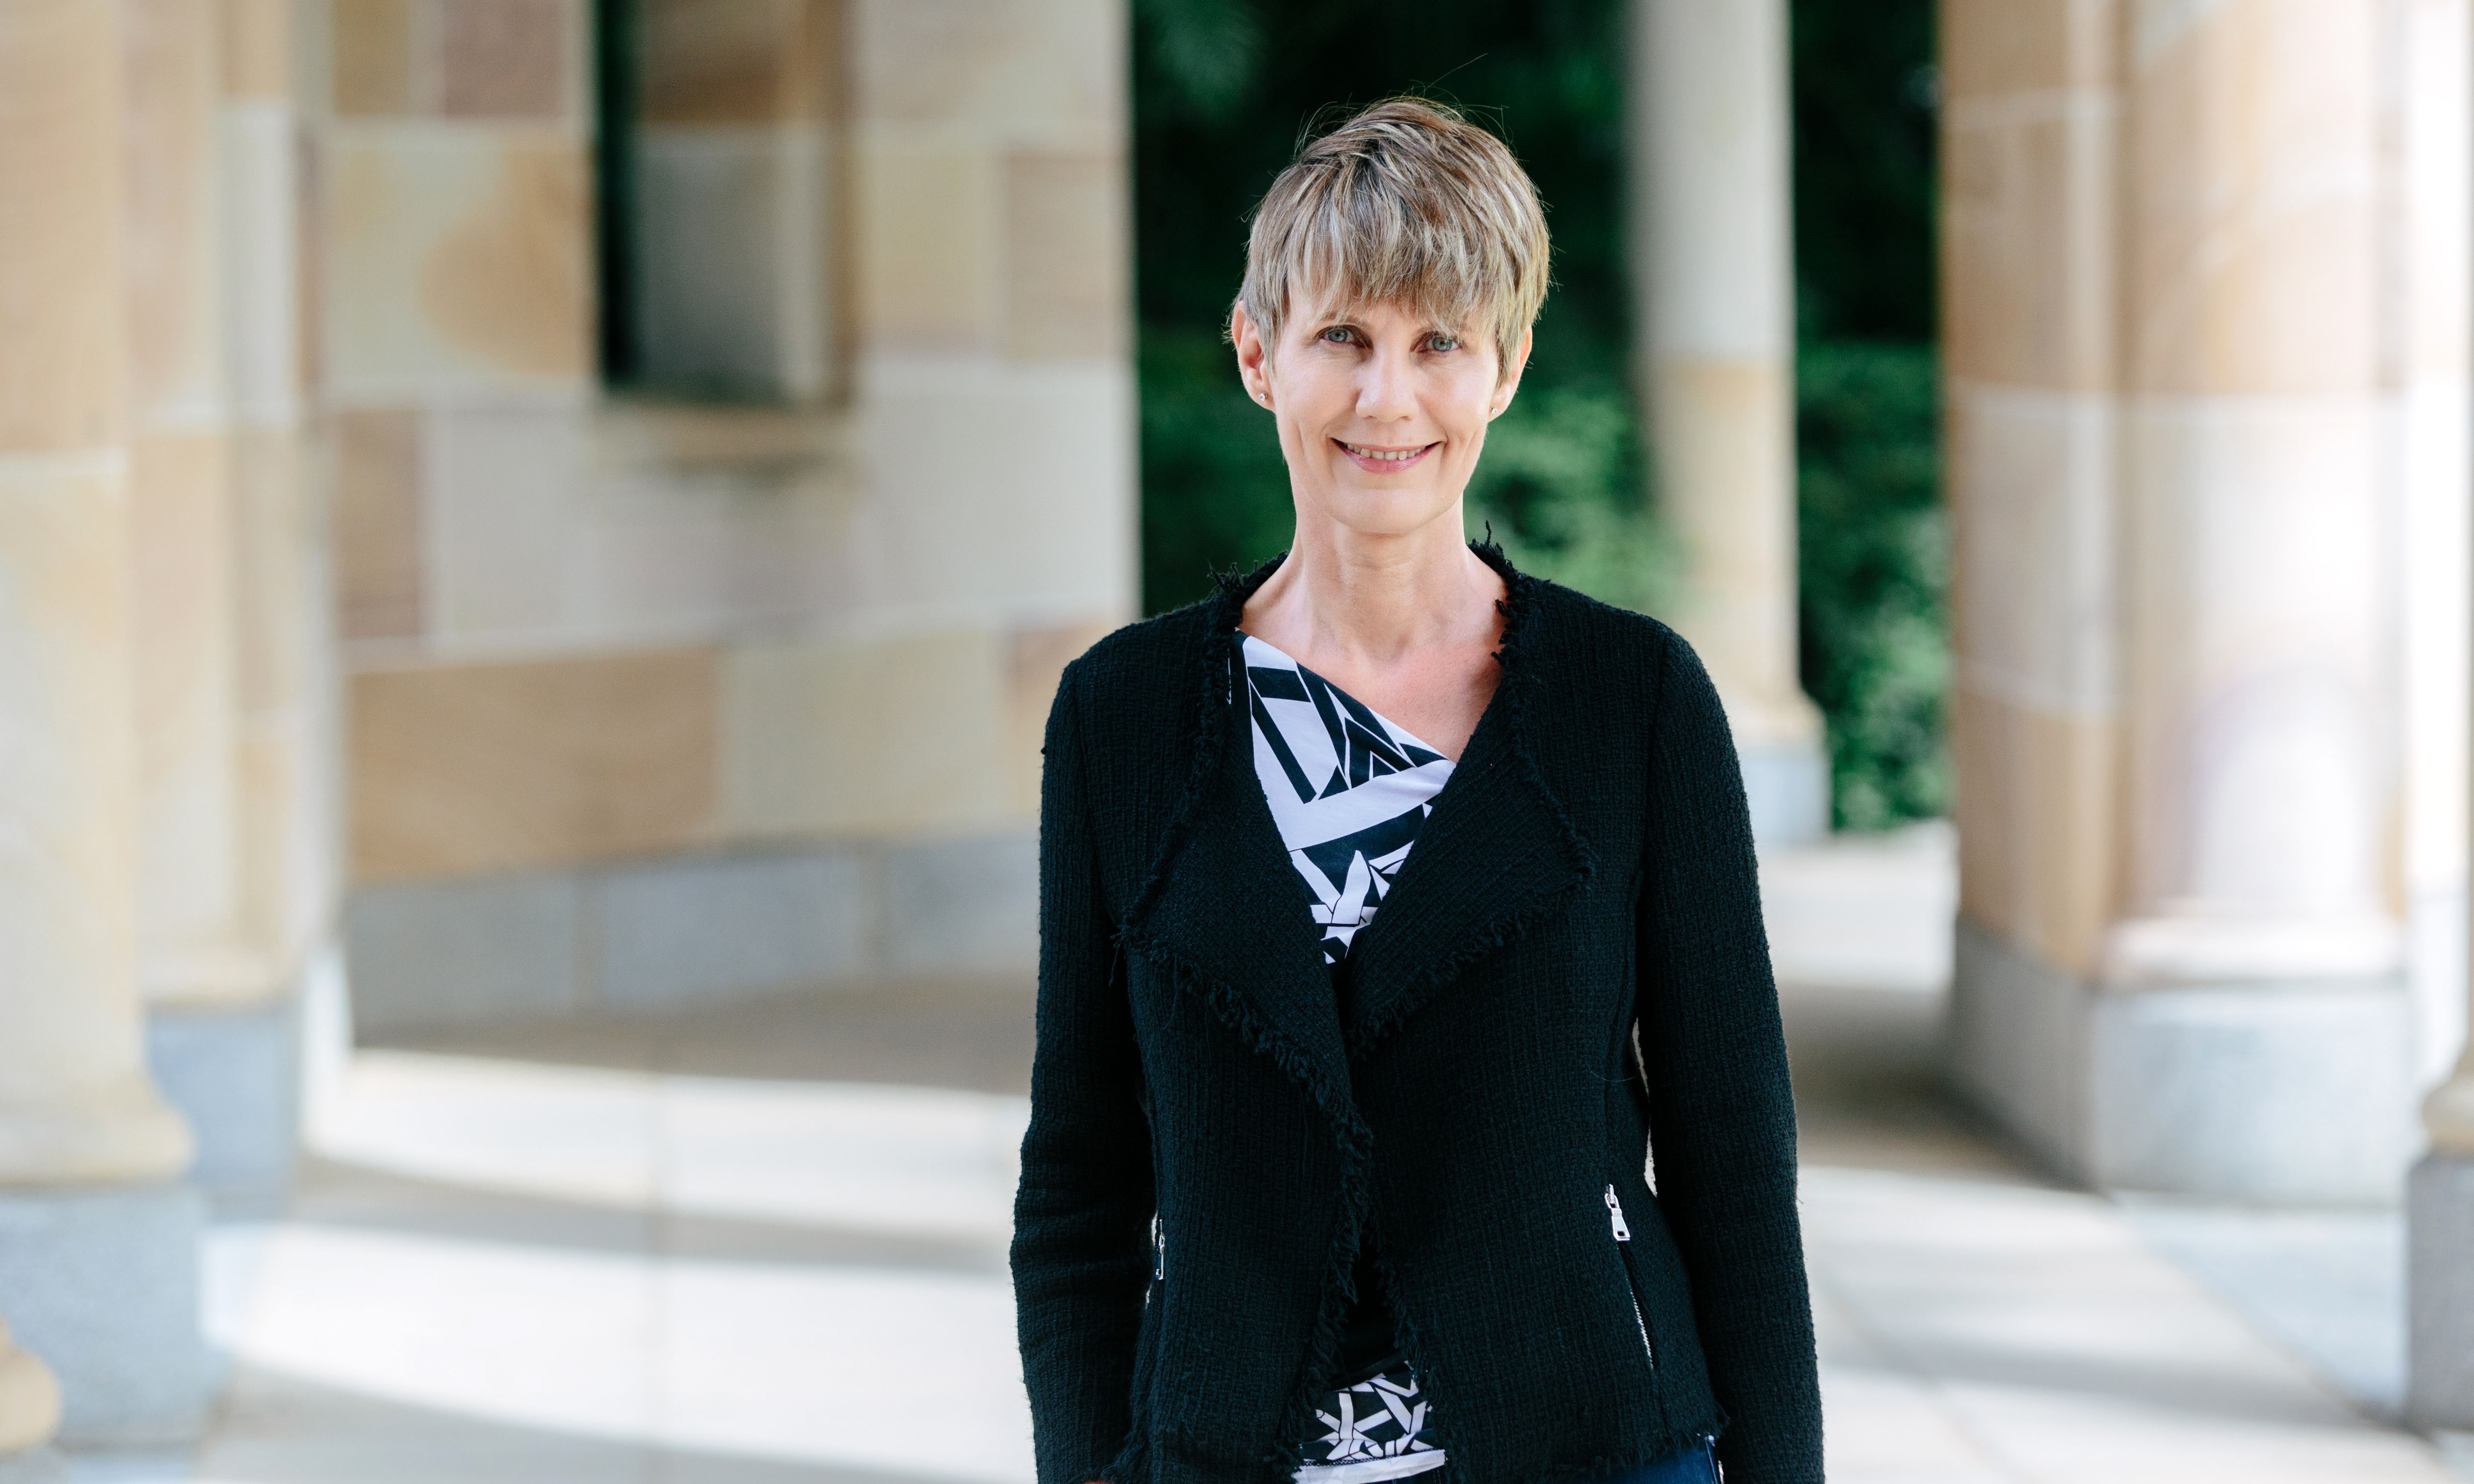 Professor Martie-Louise Verreynne will take up the role of Deputy Pro Vice-Chancellor Research and Innovation in the College of Business.